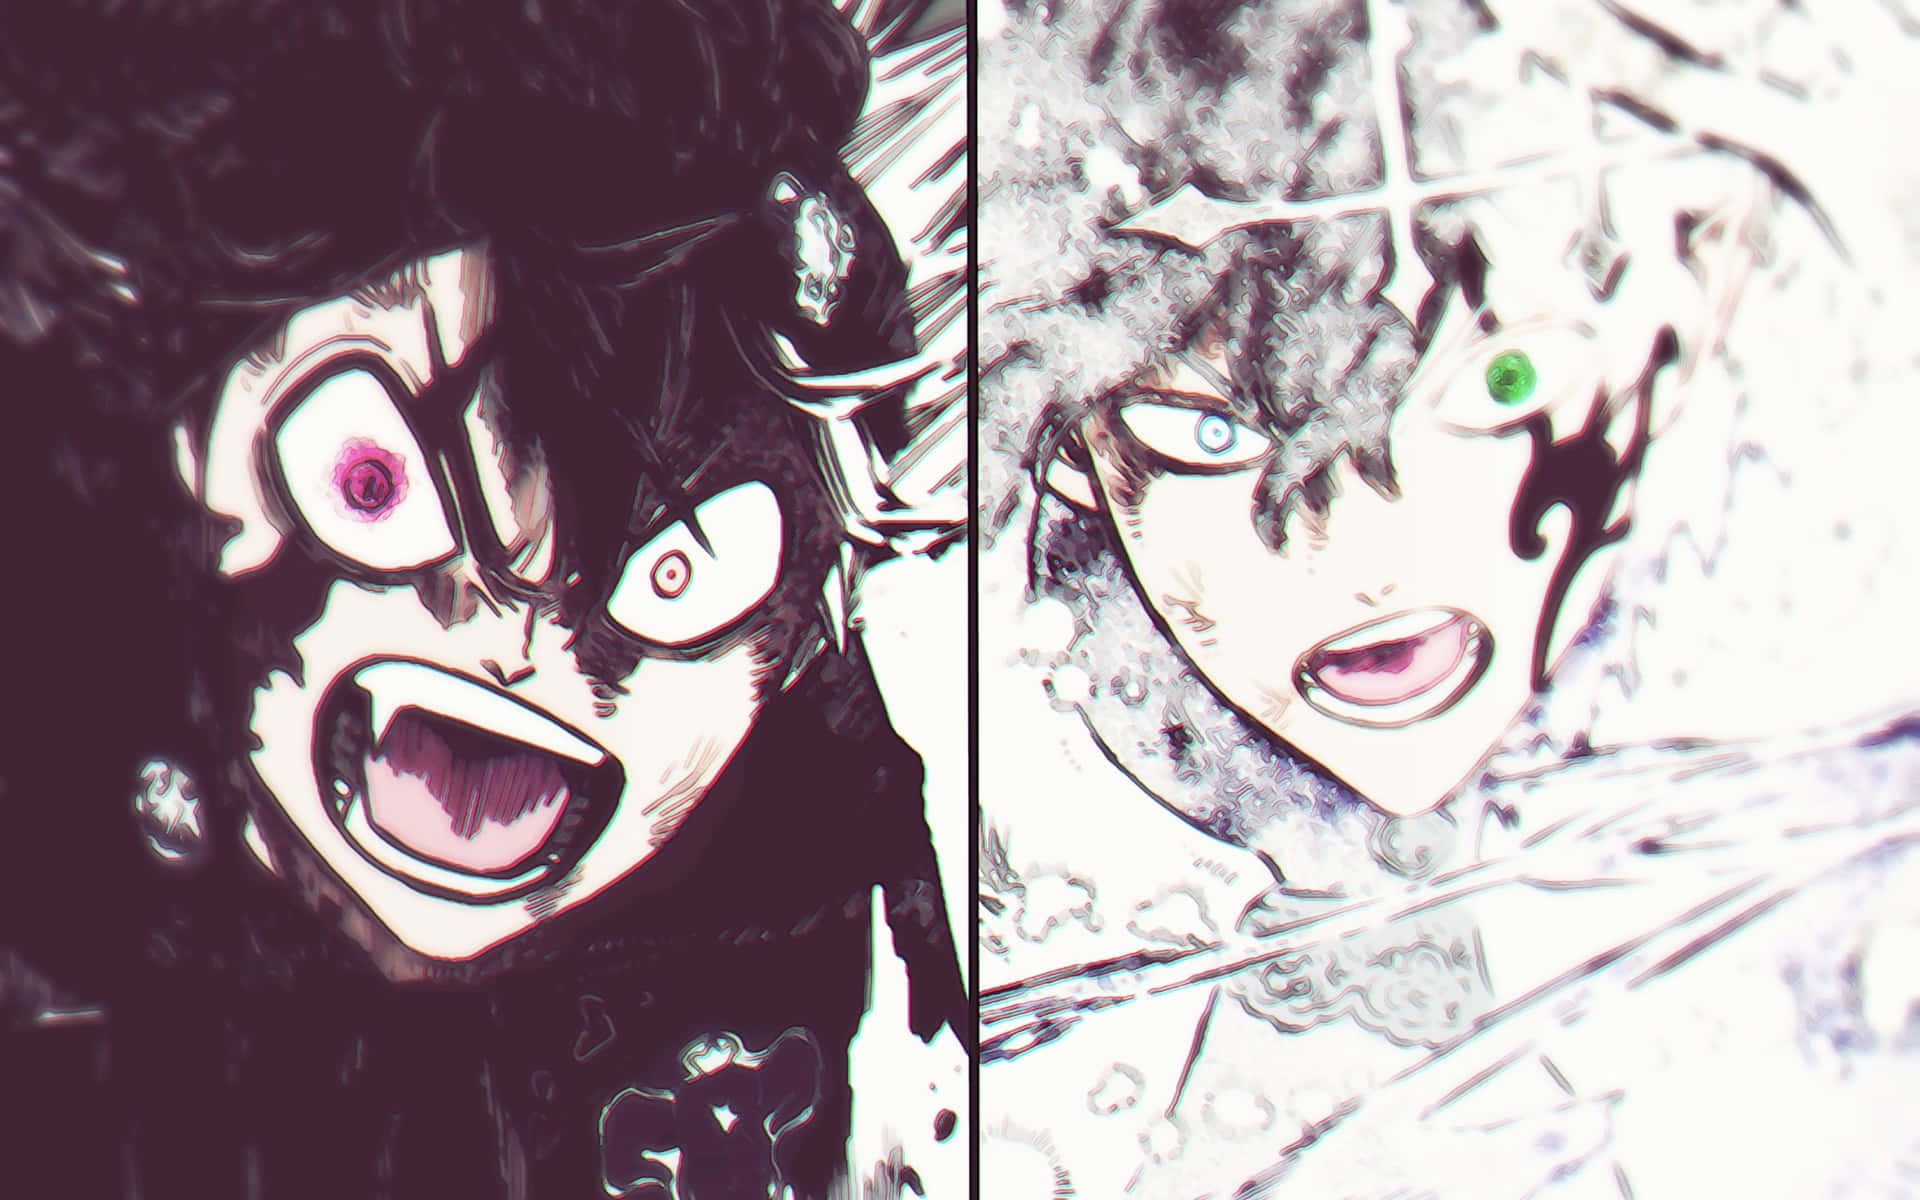 "Yuno from Black Clover is an Asta's greatest rival and friend" Wallpaper